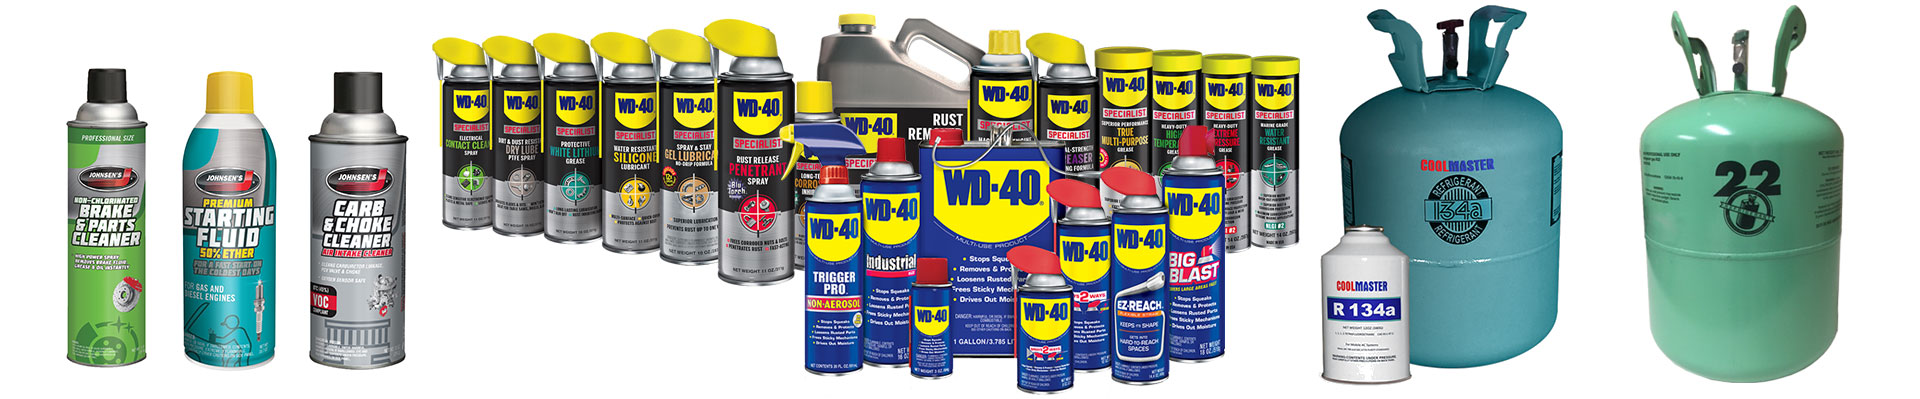 AEROSOL-CLEANERS-FUNCTIONAL-PRODUCTS-&-PENETRATING-OILS-Sutton